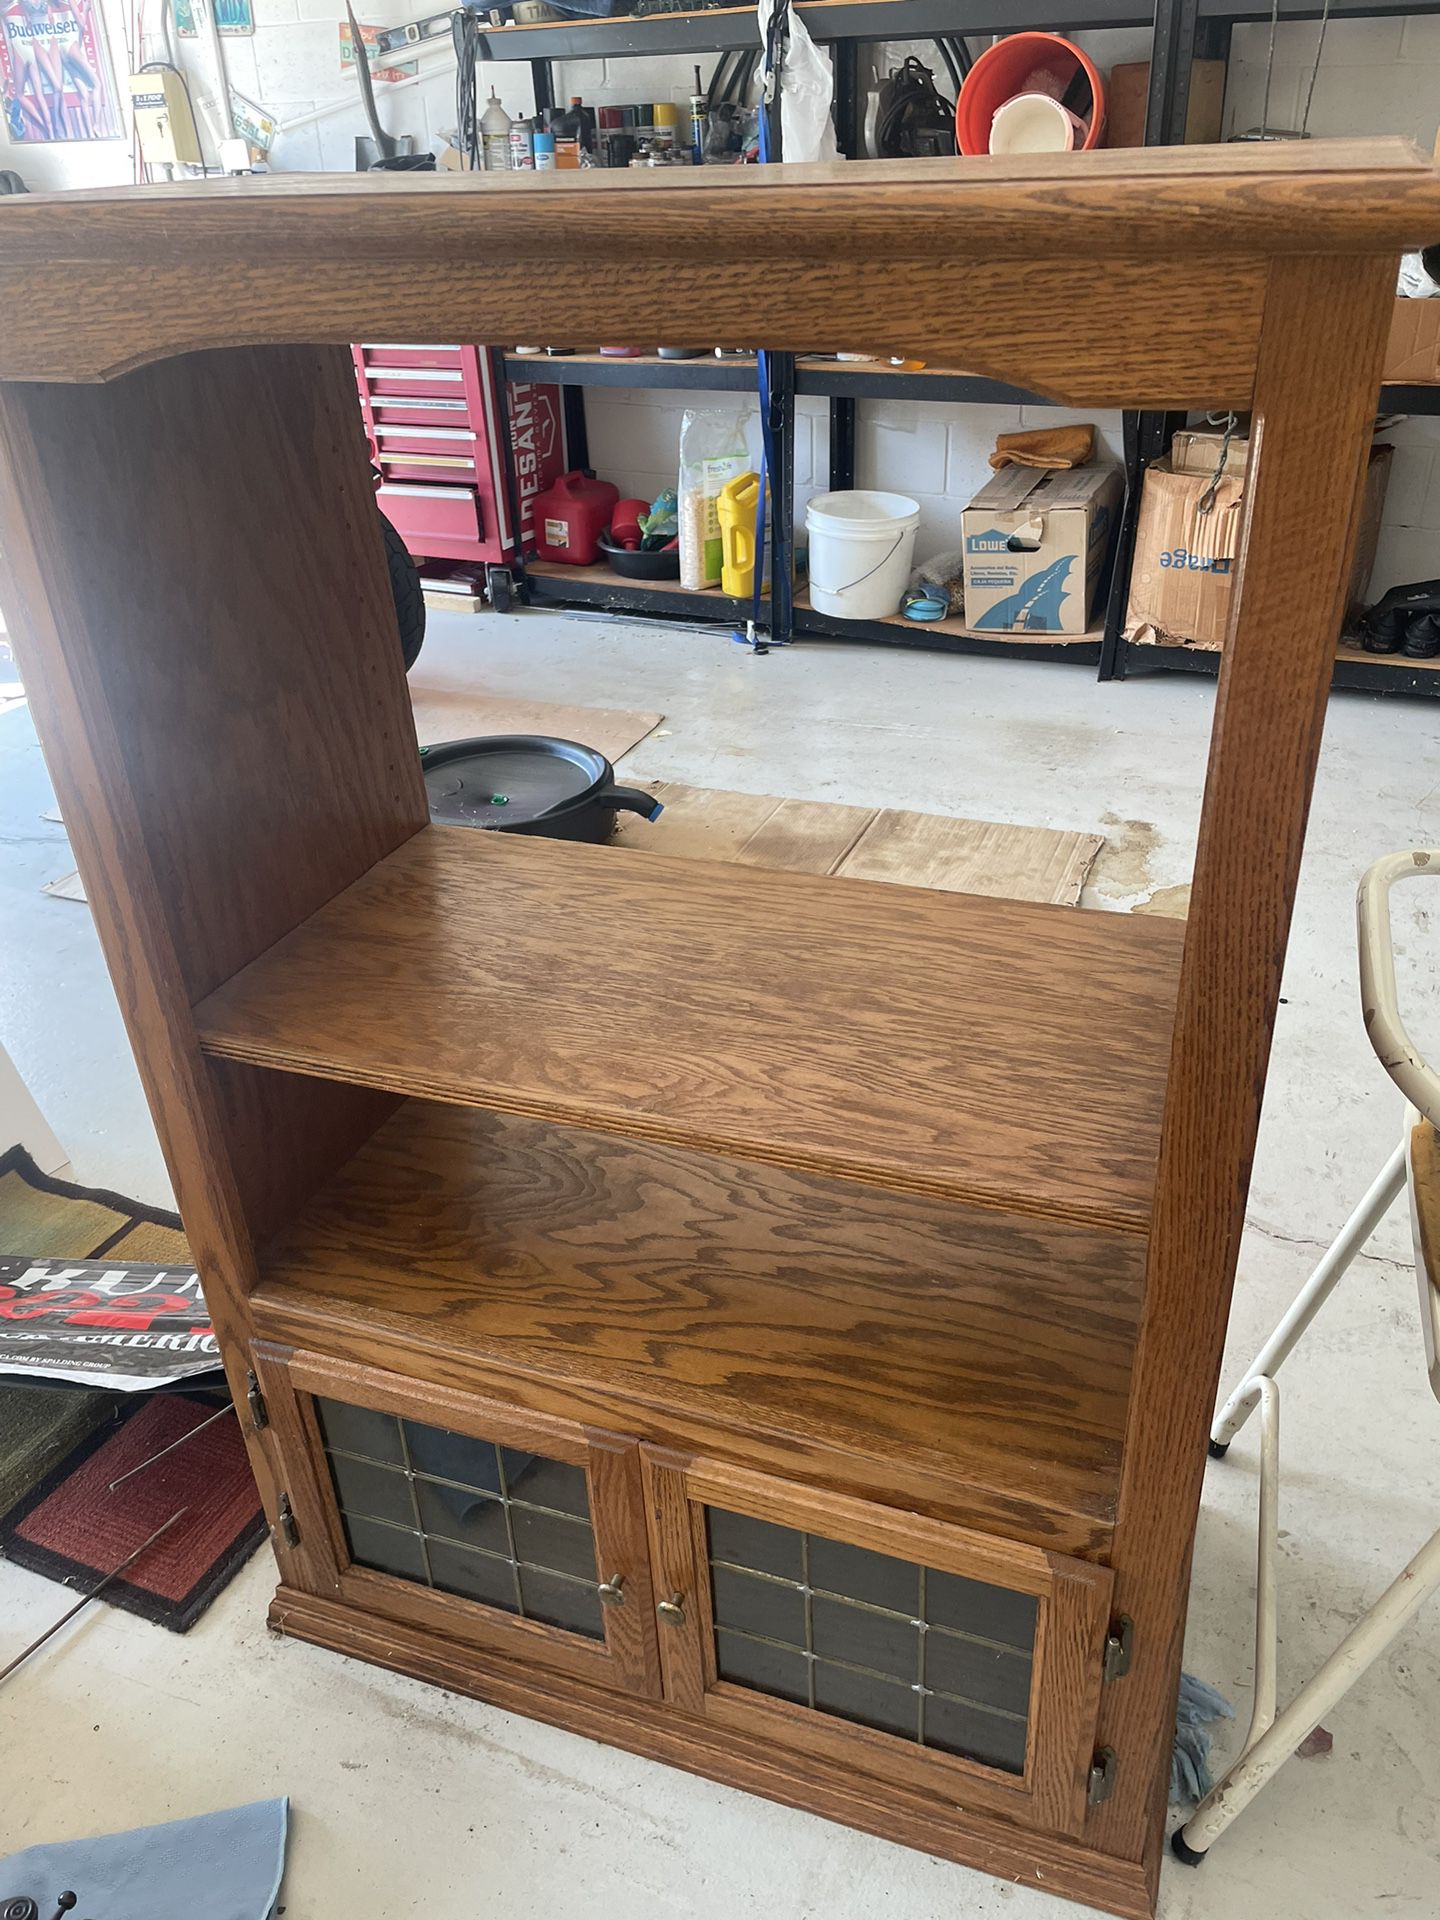 Wooden Cabinet With Shelves